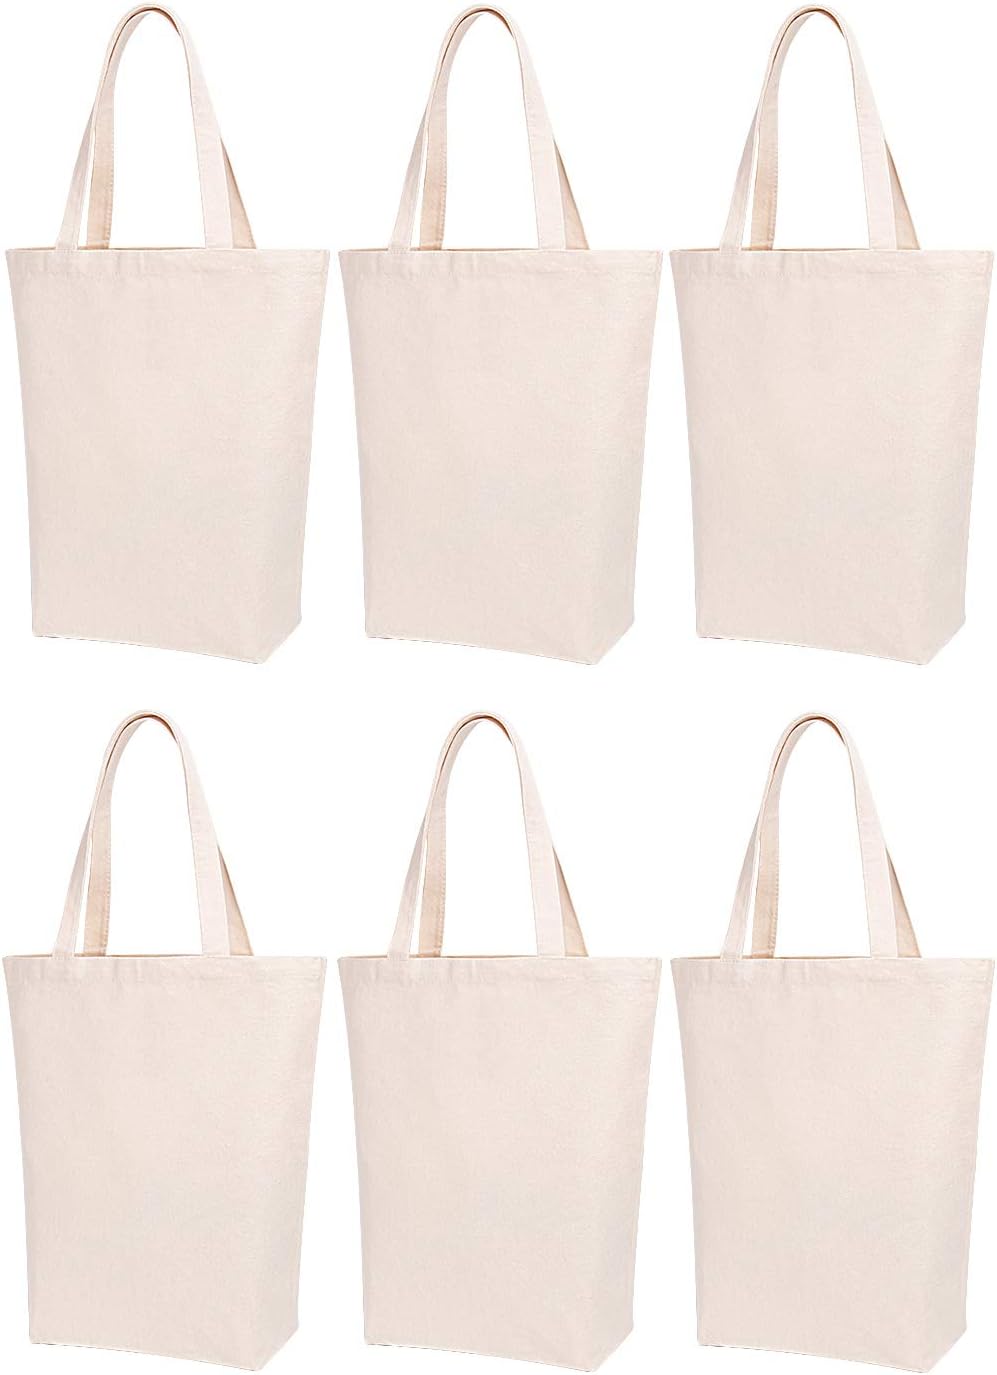 Lily queen Natural Canvas Tote Bags DIY for Crafting and Decorating Reusable Grocery Washable Bag Shopping Bag (Natural - 6 Pack)